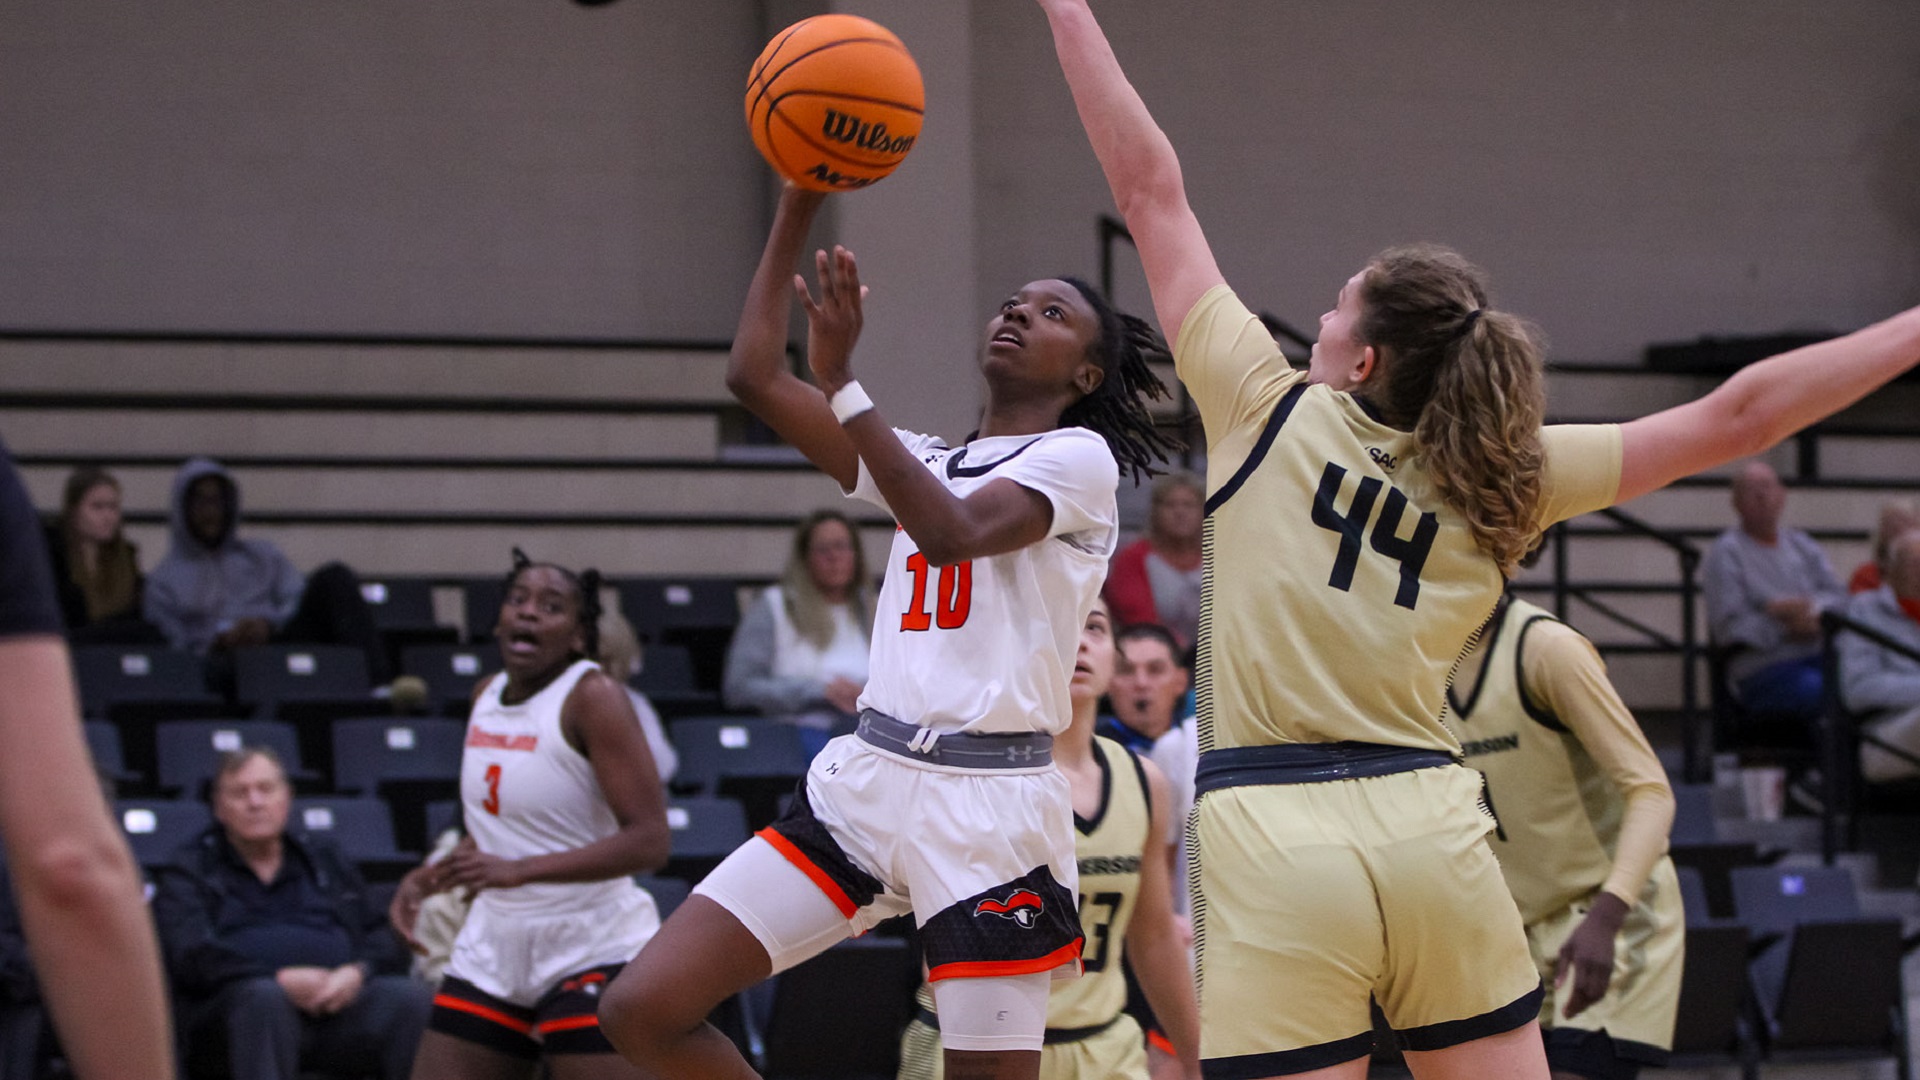 Artasia Cole scored eight points and had four assists in the Pioneers' comeback win over Anderson (photo by Kari Ham)